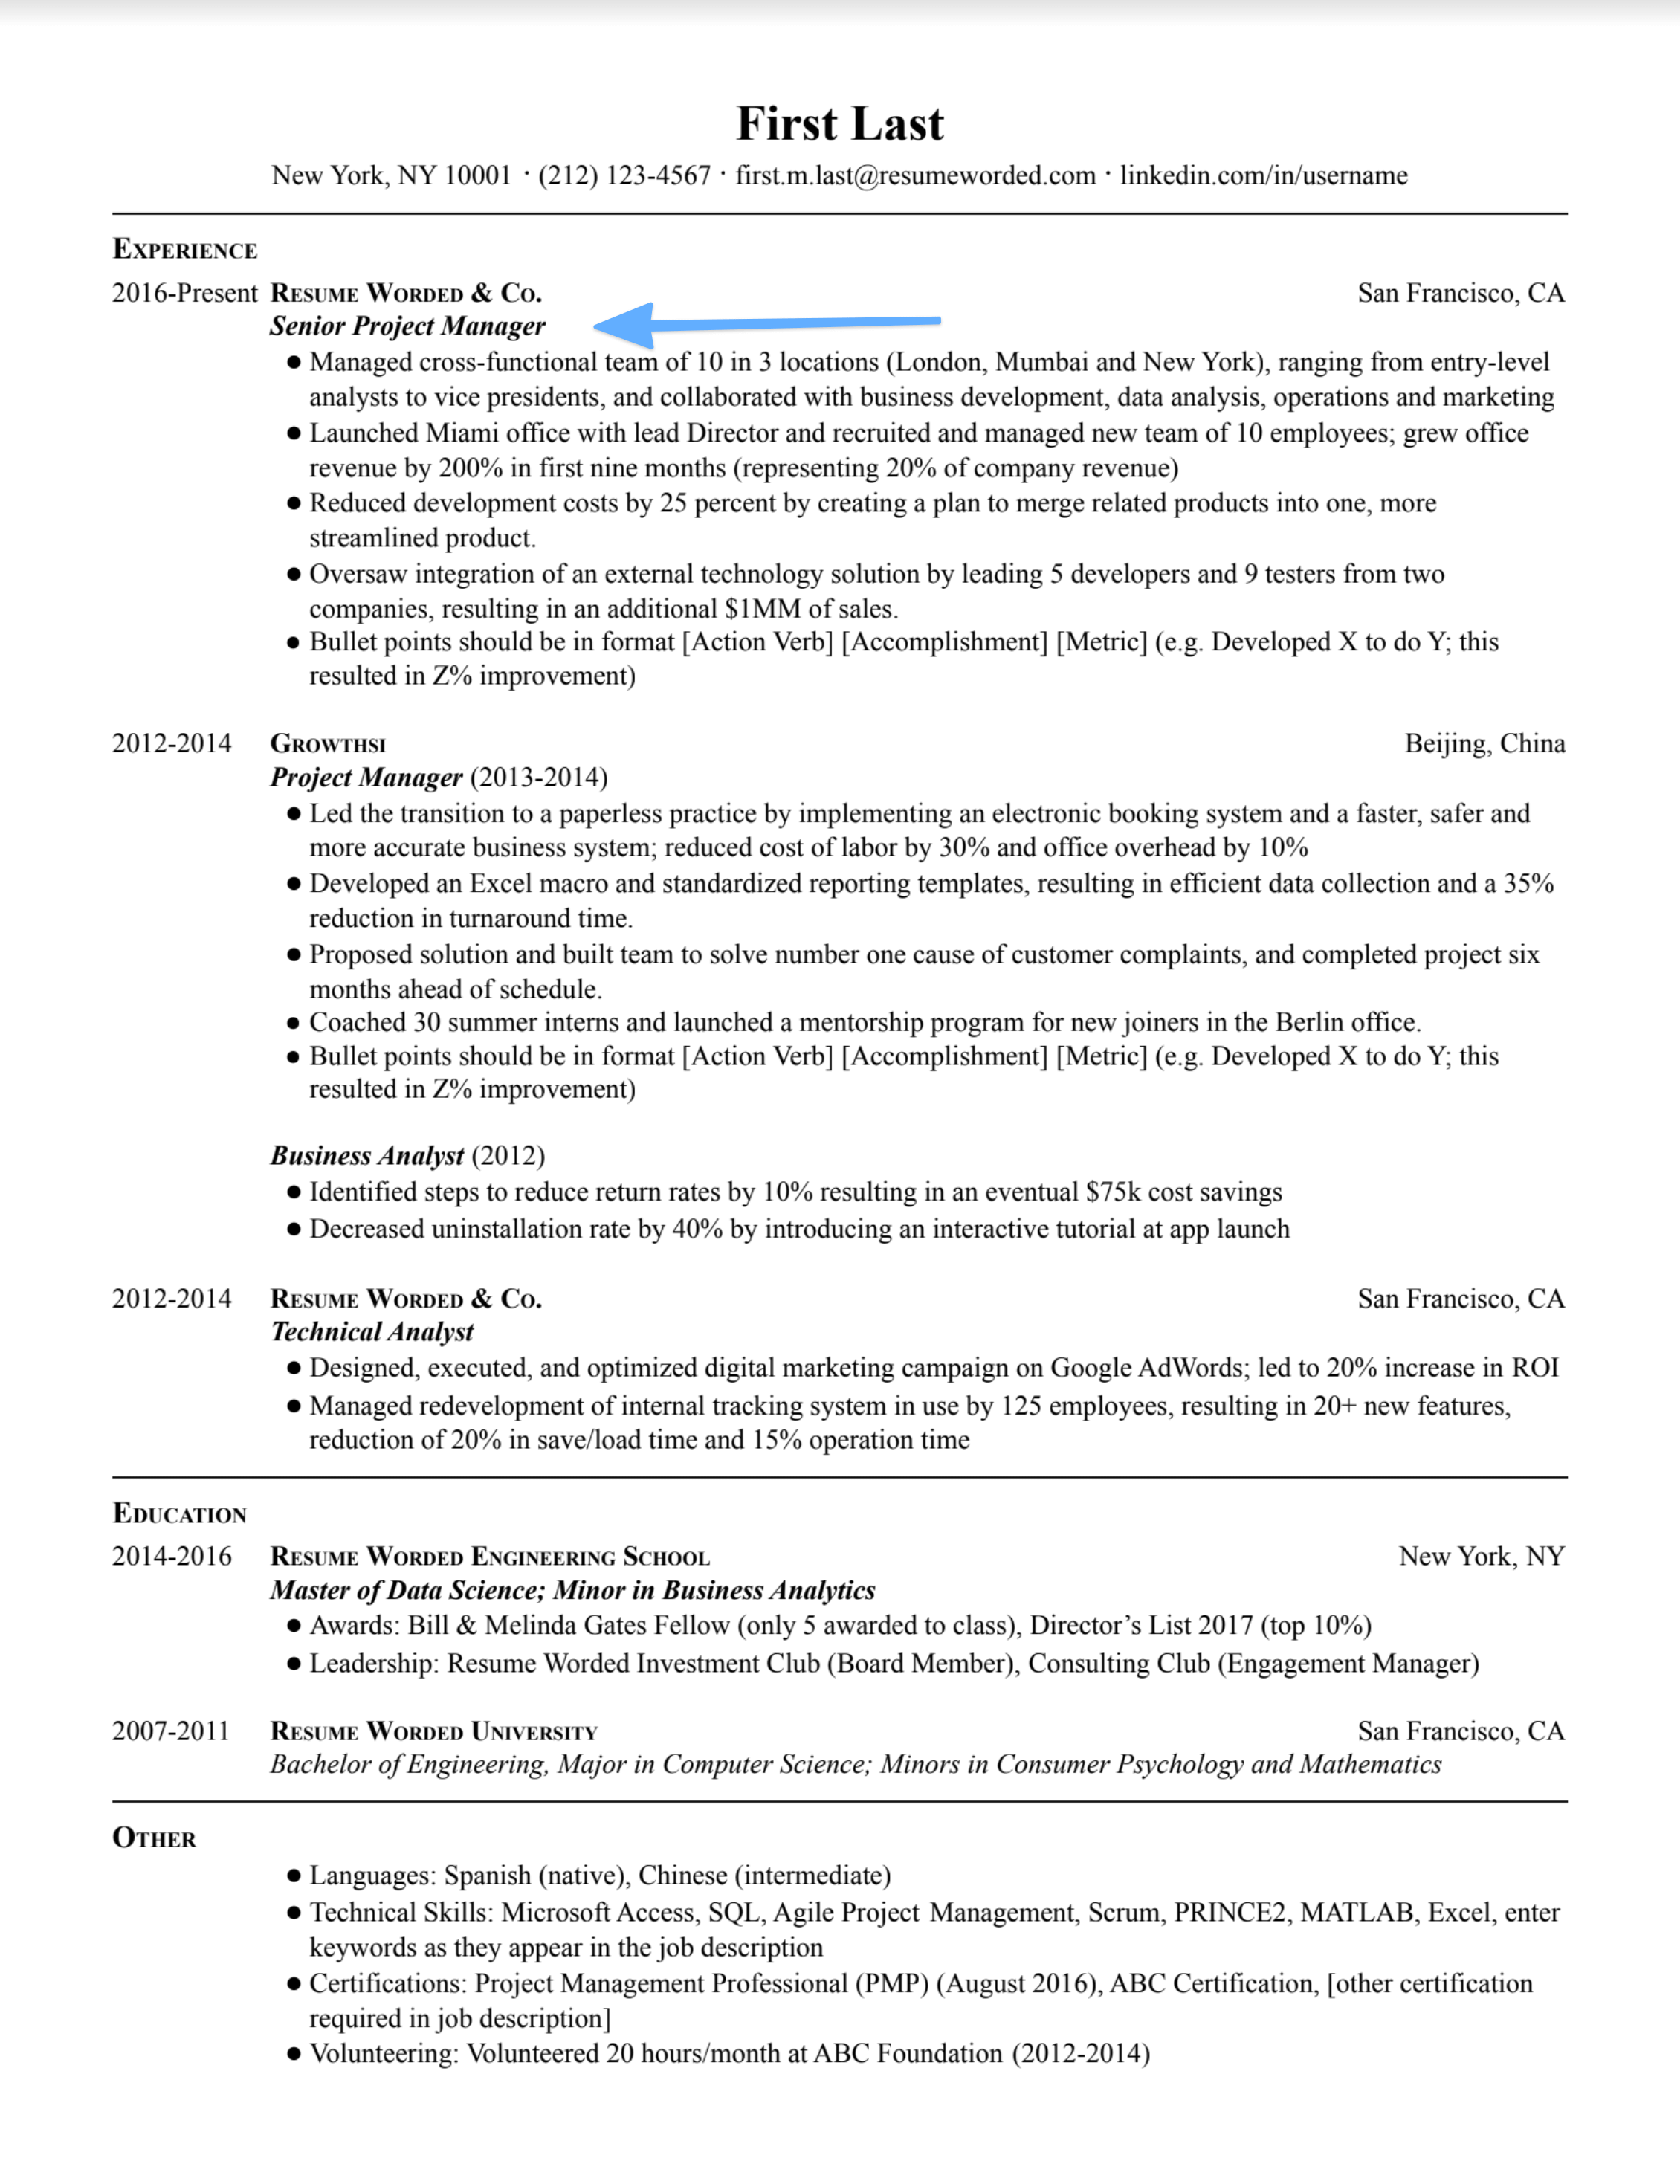 Resume screenshot of a Senior Project Manager emphasizing leadership and industry expertise.